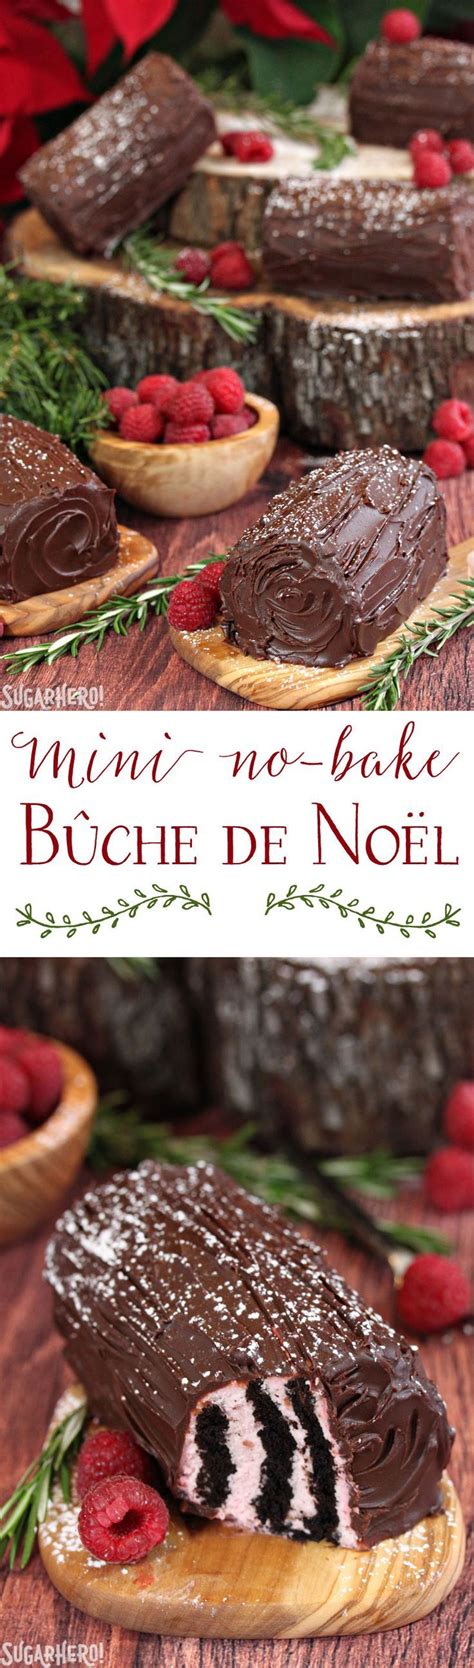 From cheery cupcakes to classic puddings, see the confections that'll have guests coming back for seconds. Mini Buche de Noel | Recipe | Christmas Desserts | Winter desserts, Christmas baking, Dessert ...